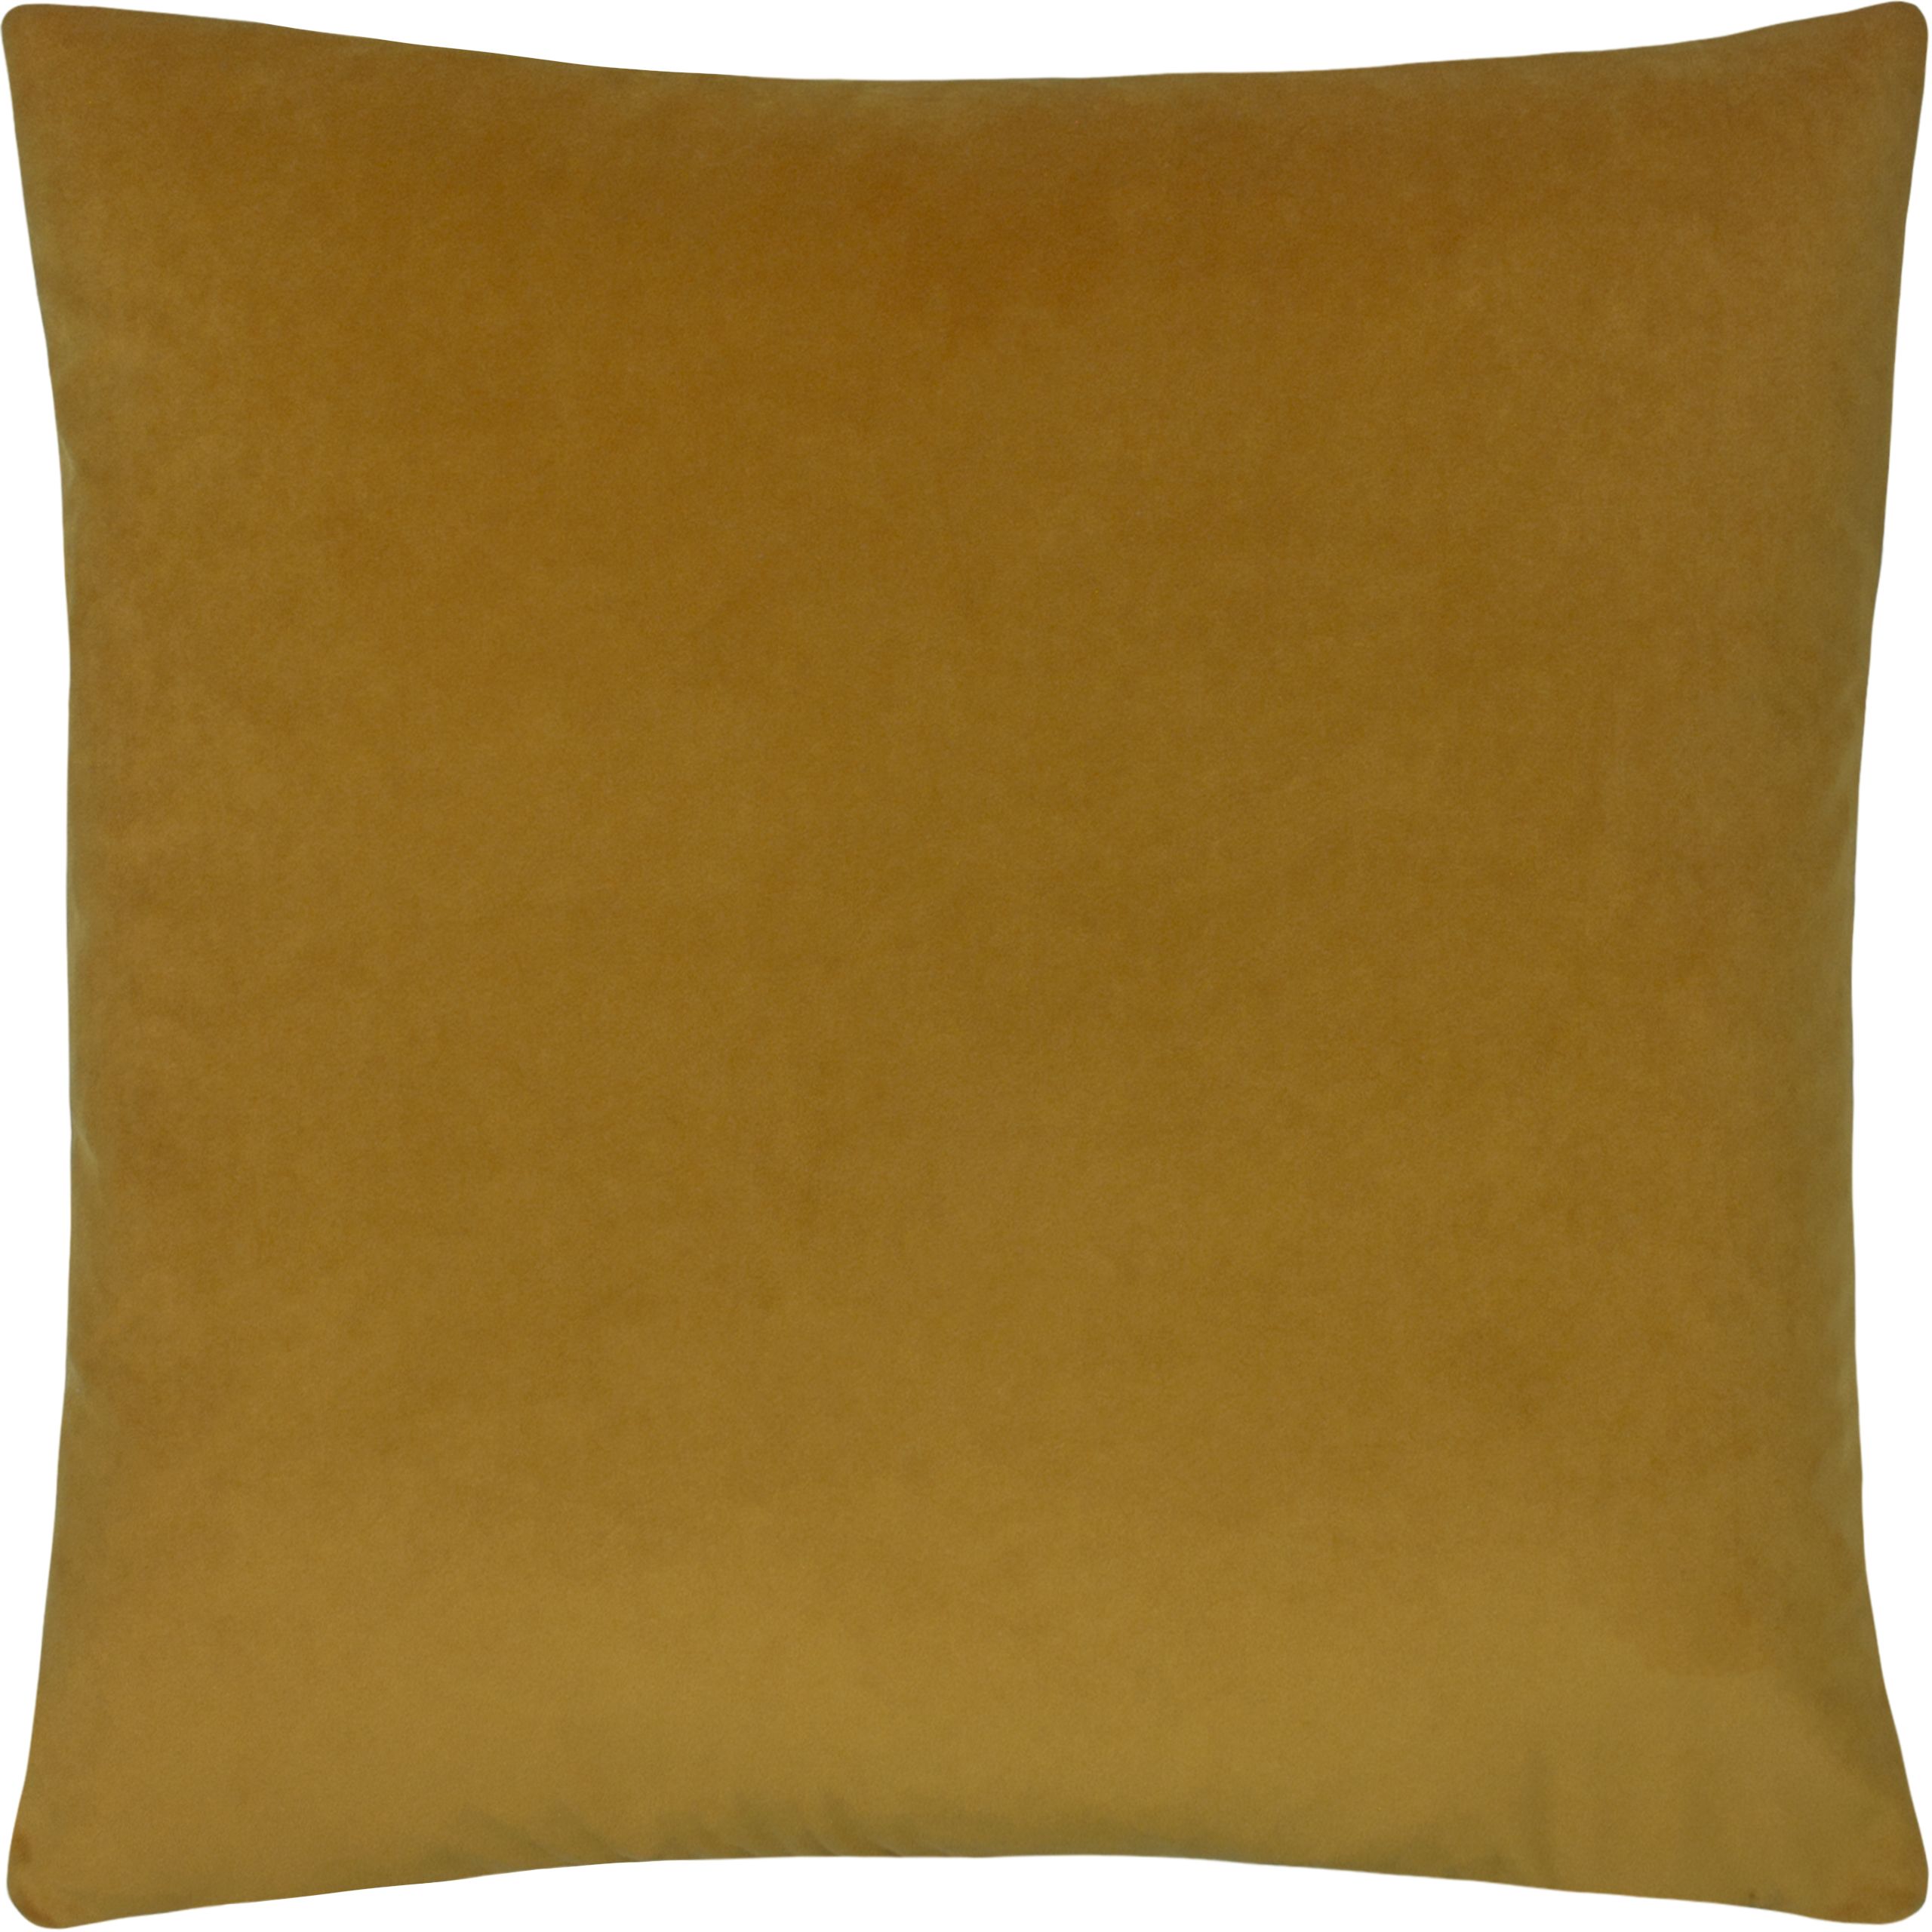 A stylish cushion that sits well on its own or mix and match with other shades that compliment each other to make a lovely addition to your home.